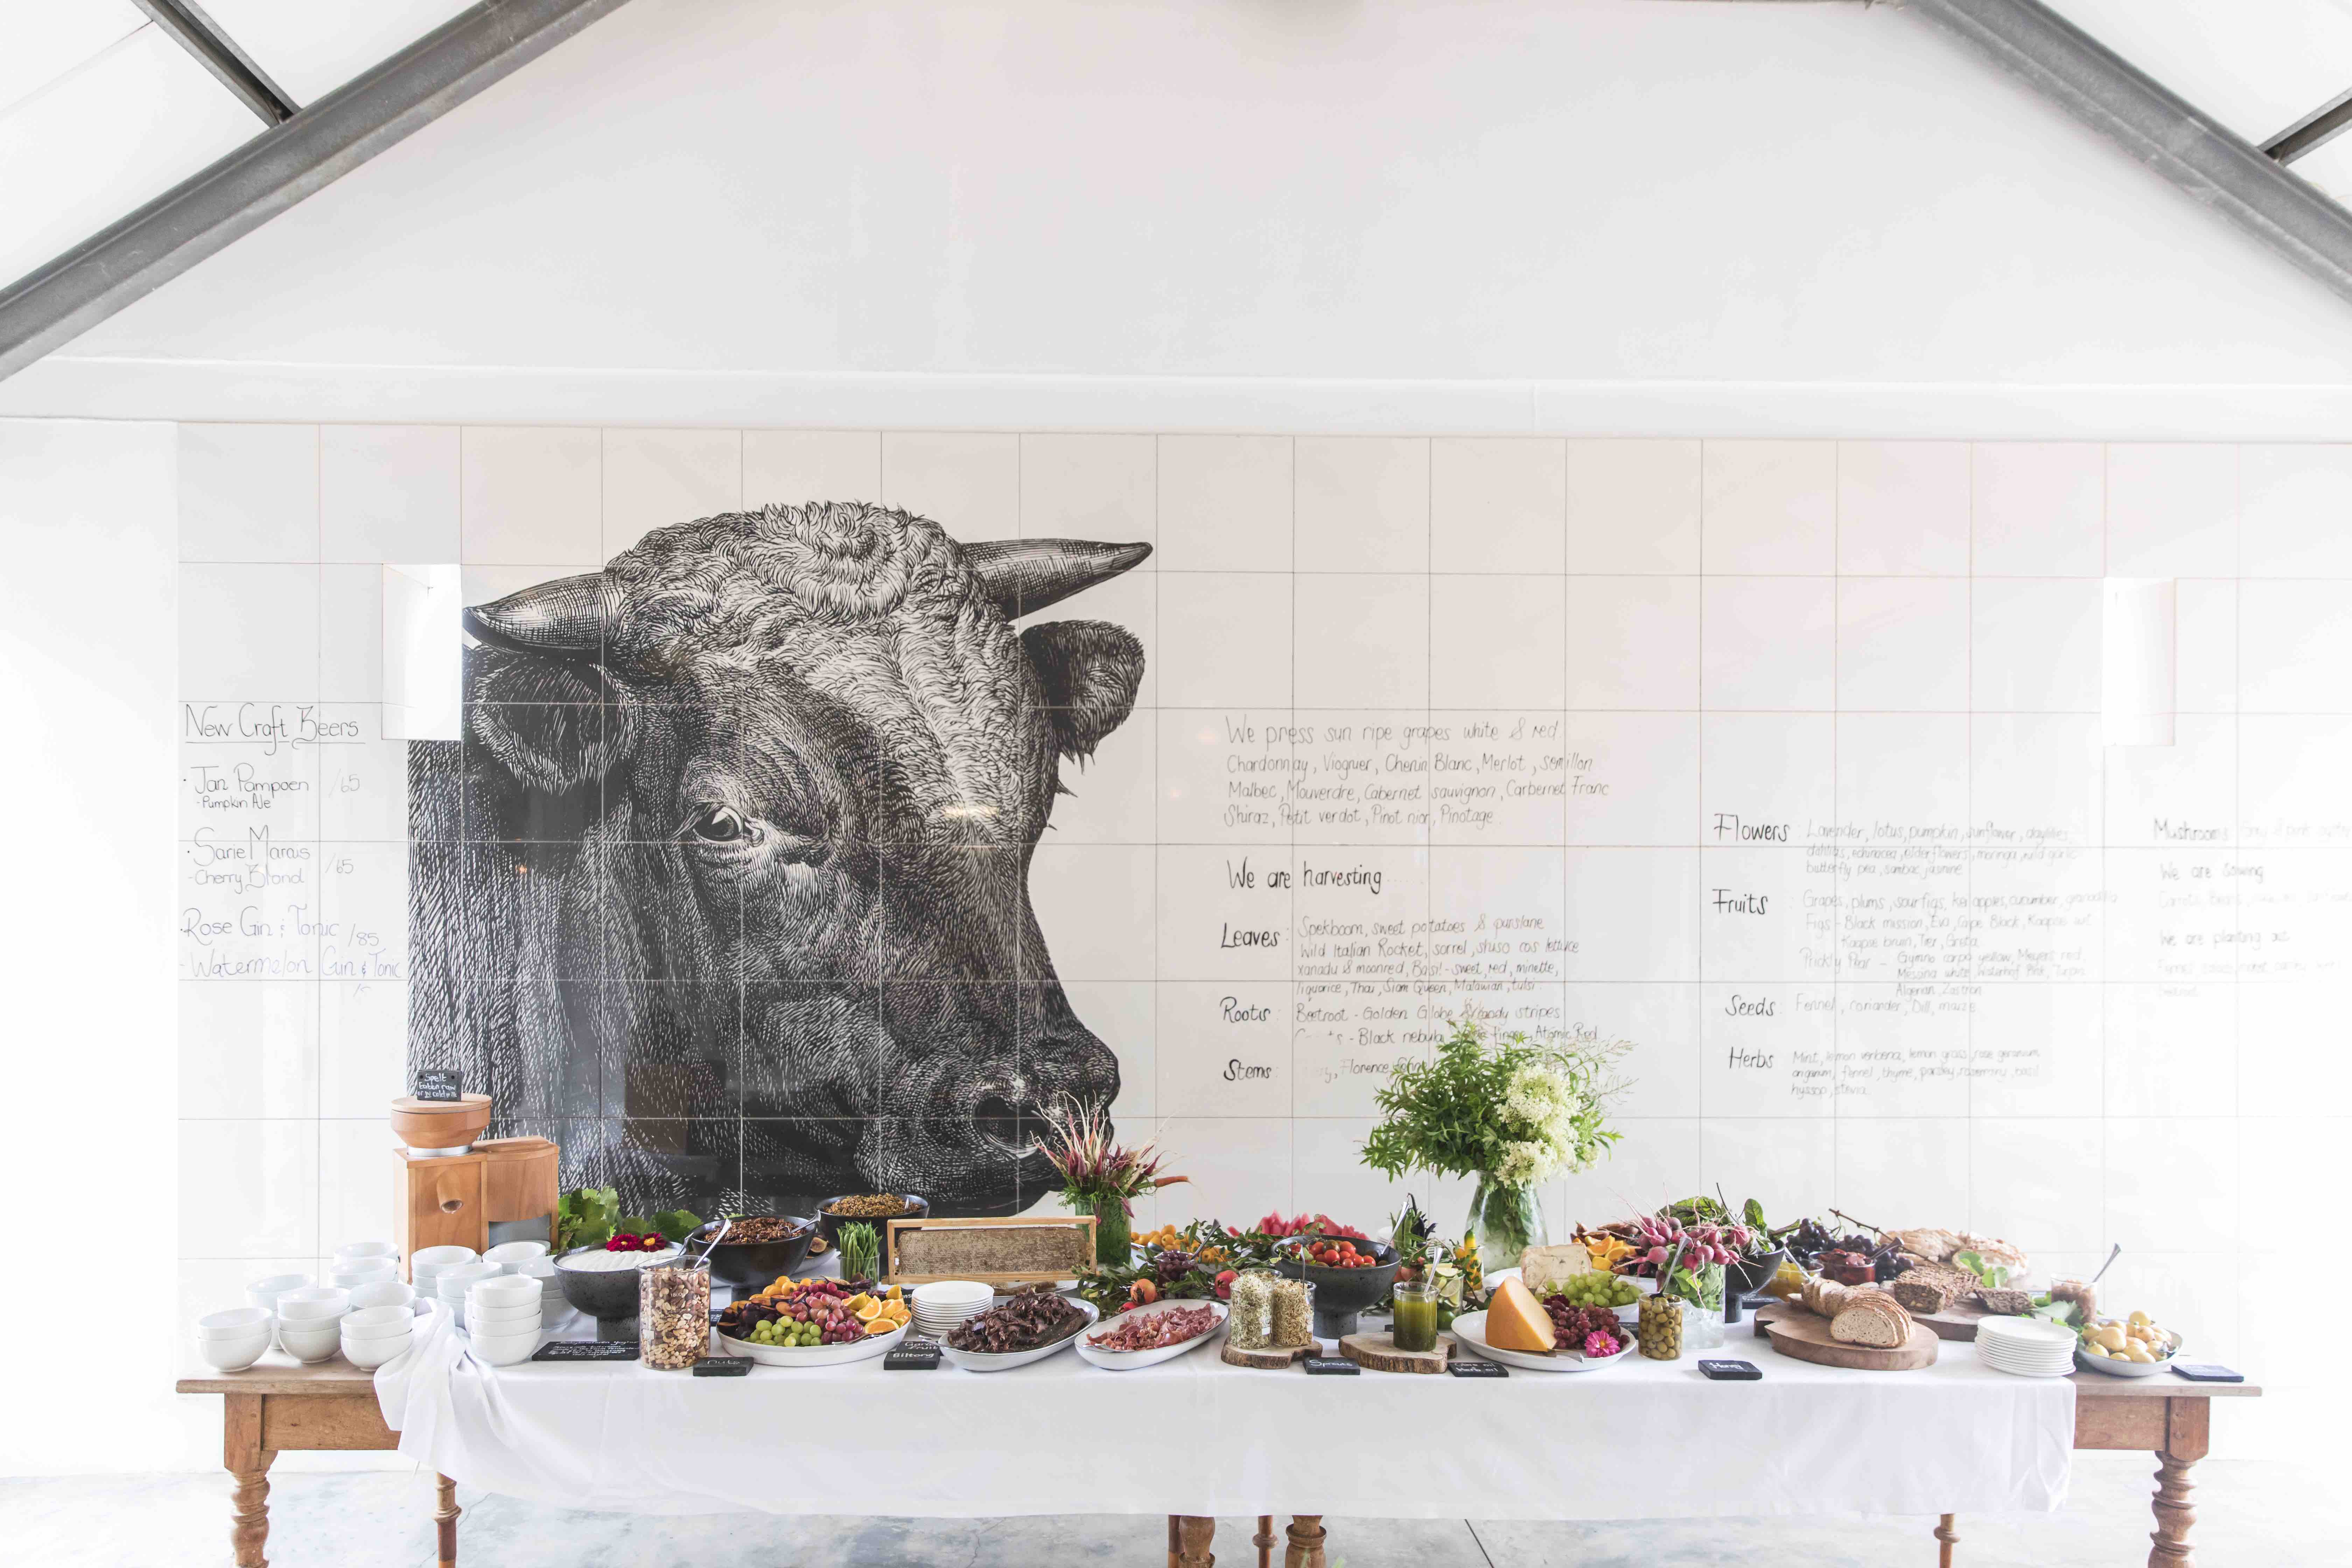 The harvest table at Babel is a visual feast! Photo Credit Babylonstoren